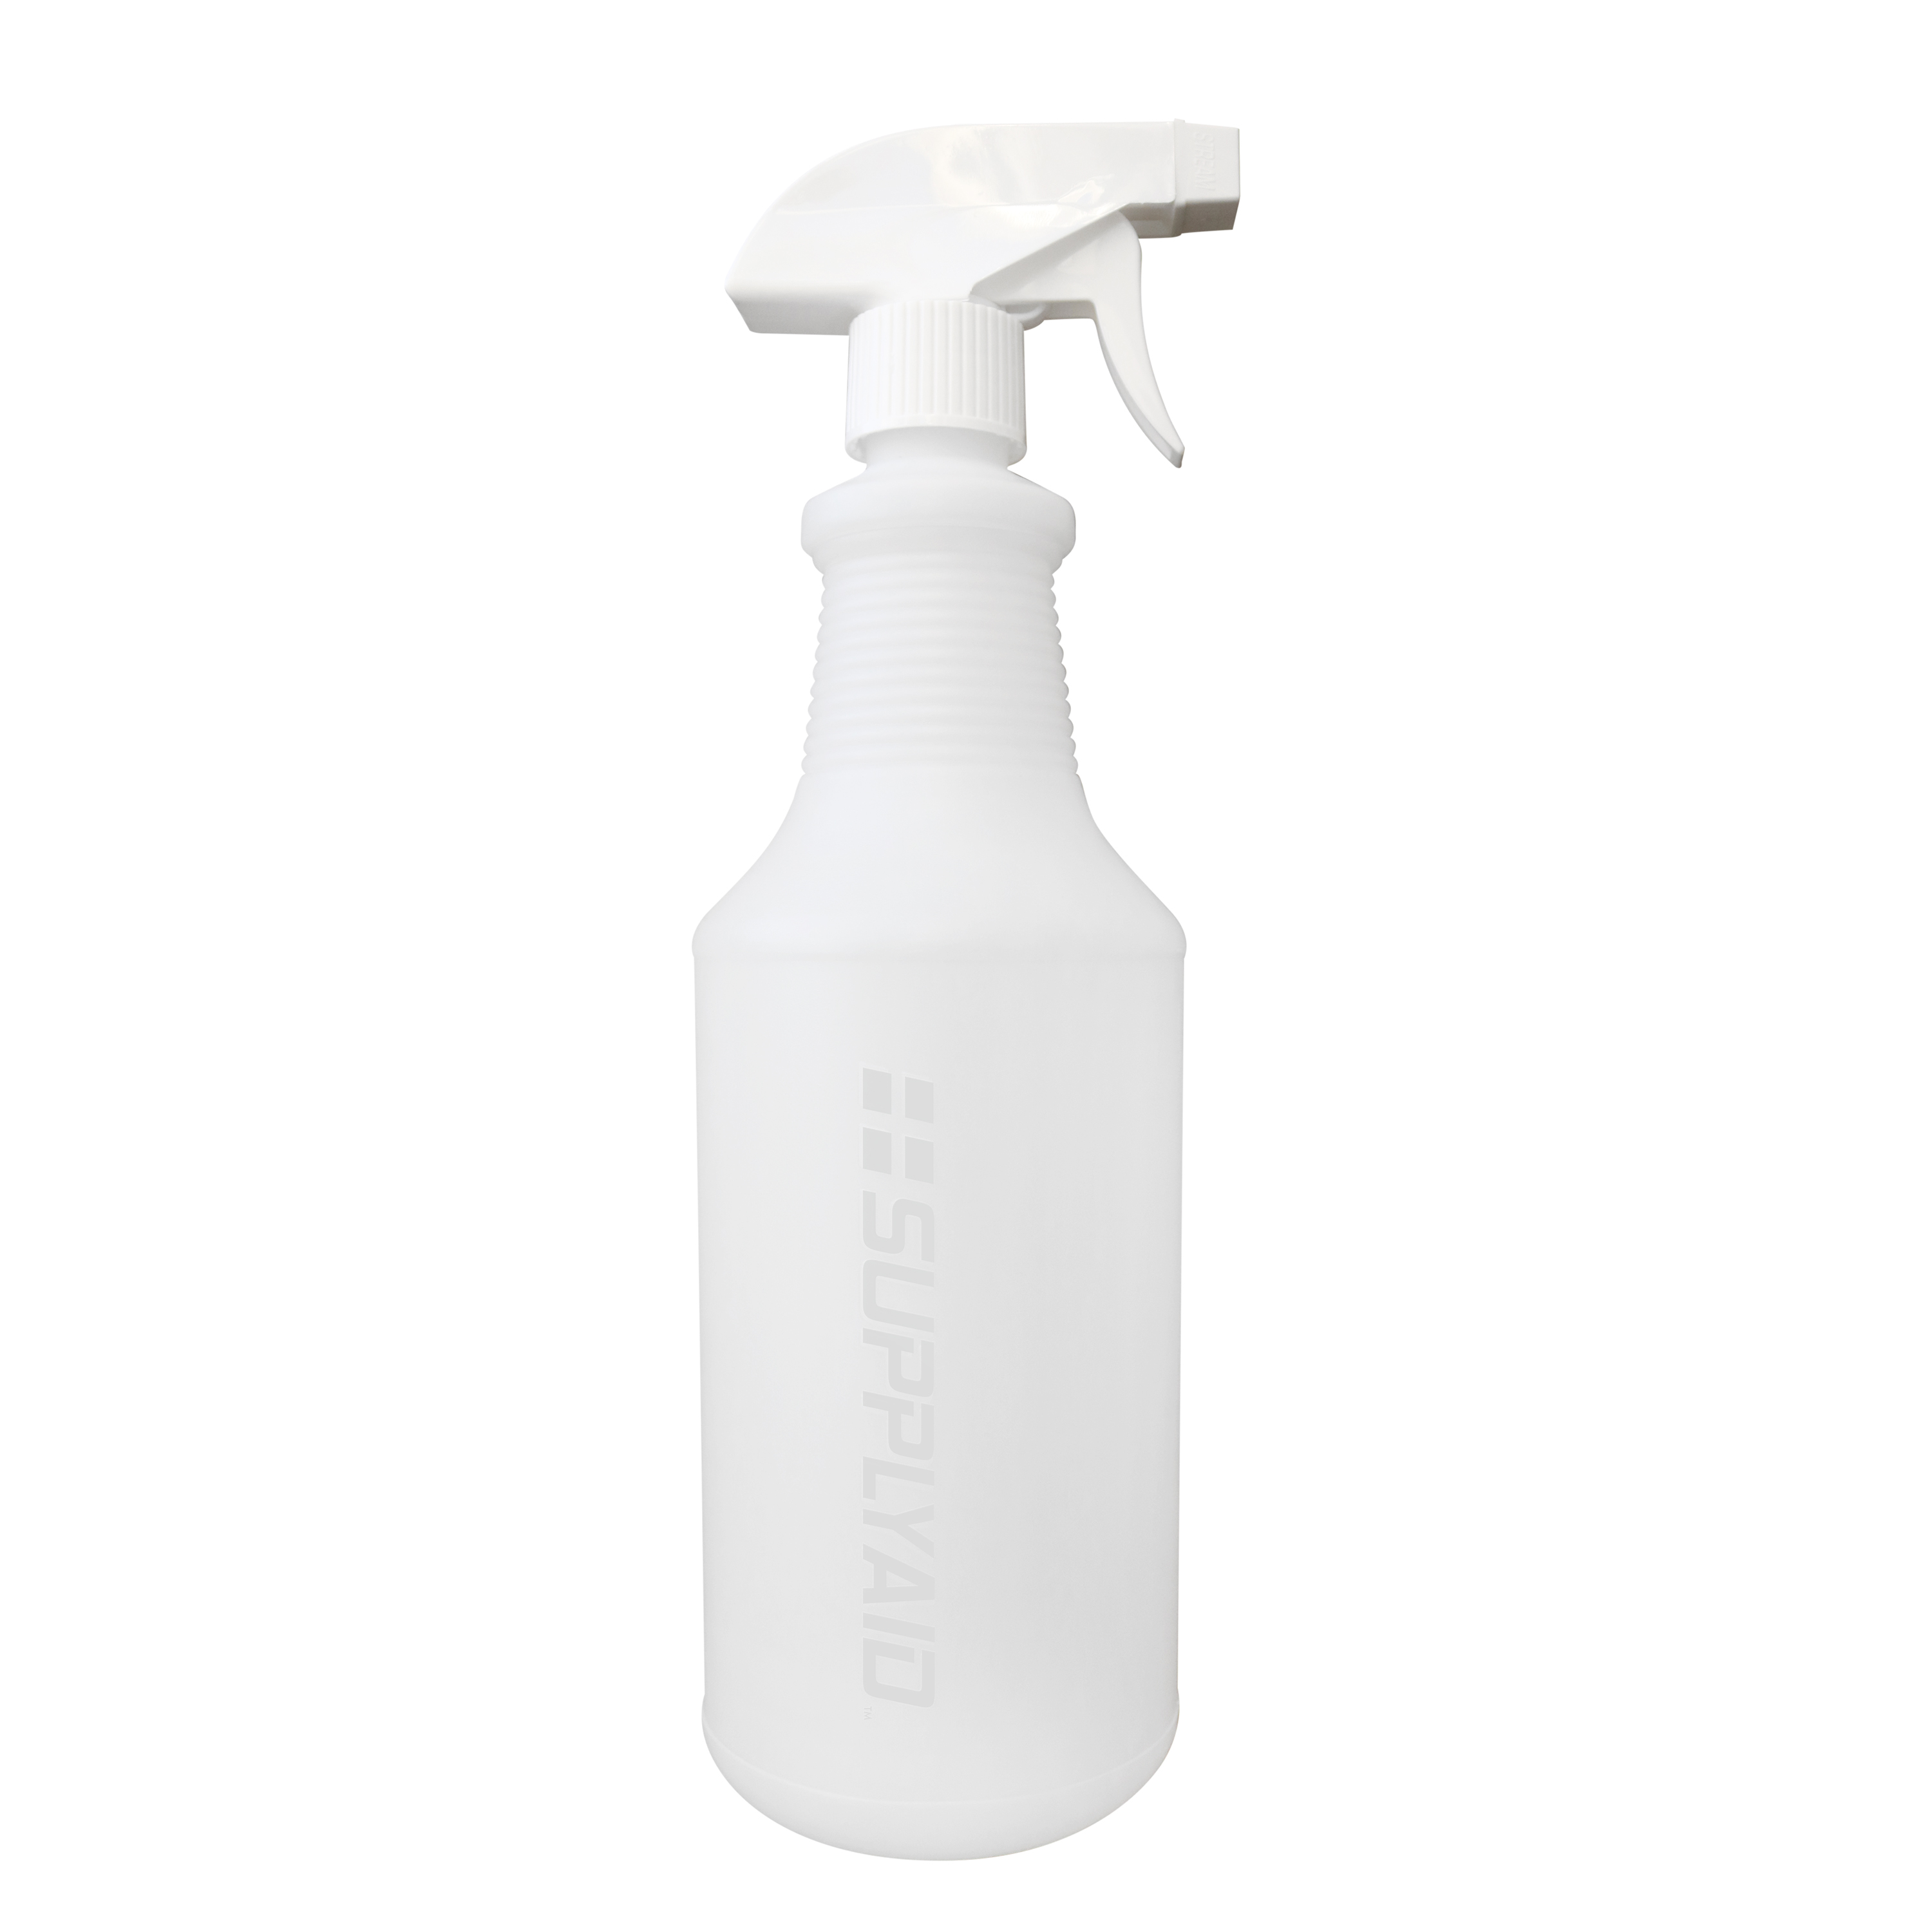 Zwipes 32 oz. Spray Bottles with Trigger Sprayer HDPE Plastic (4-Pack)